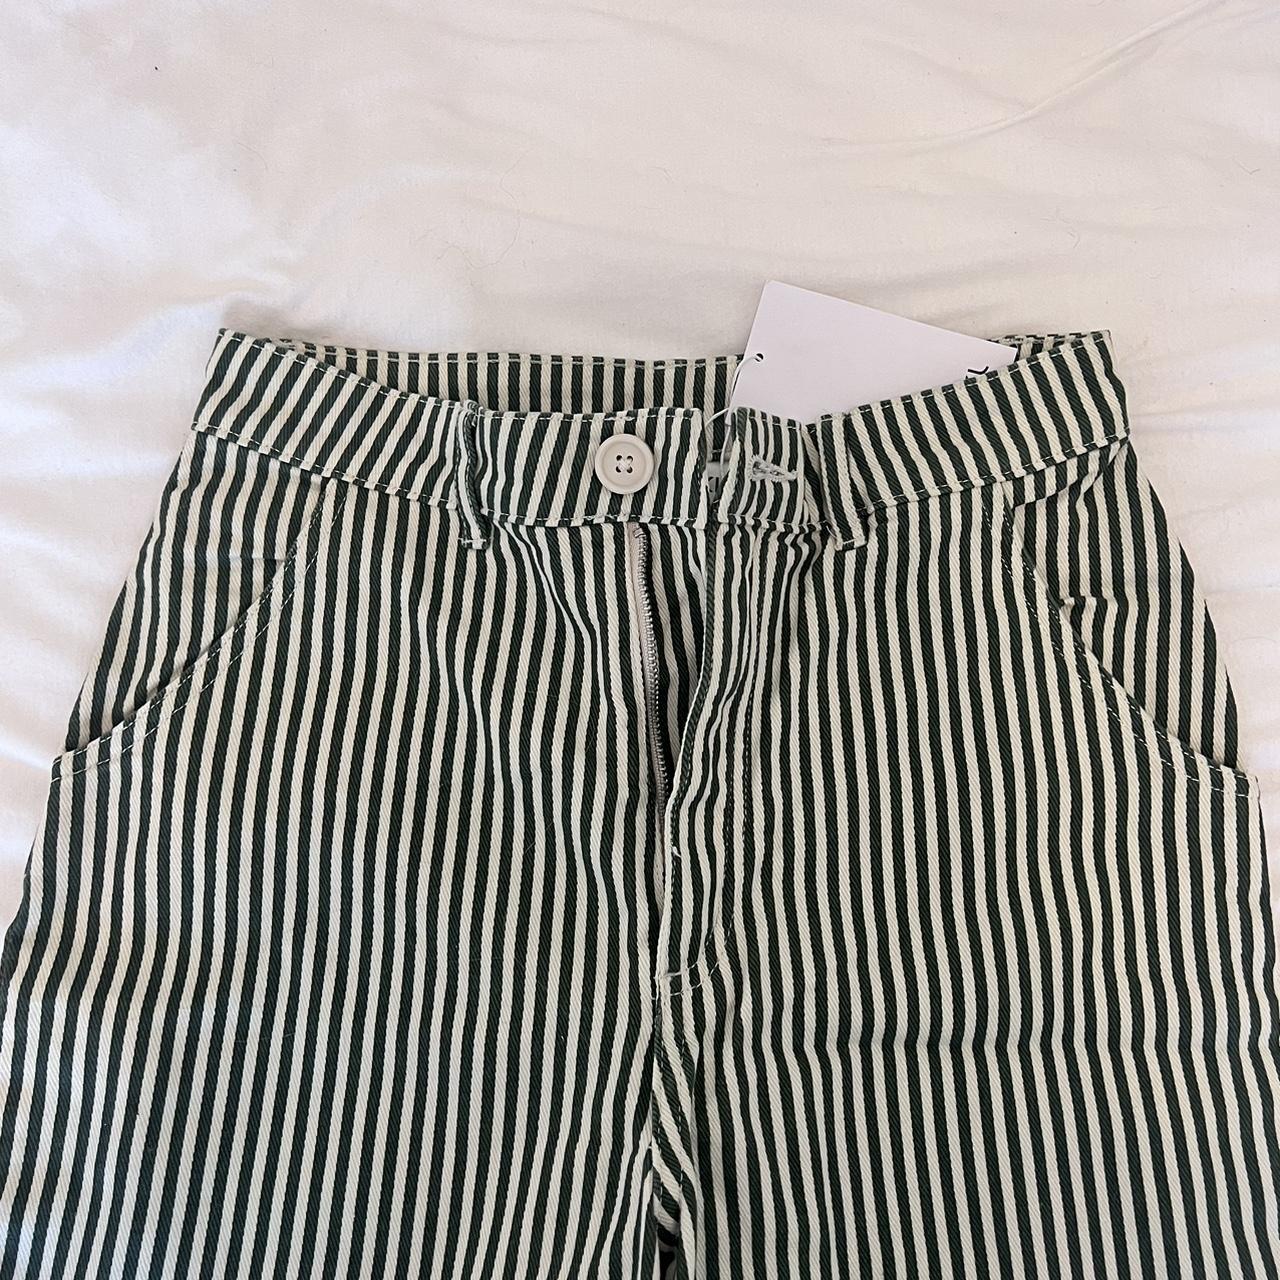 Monki Women's Green and White Jeans